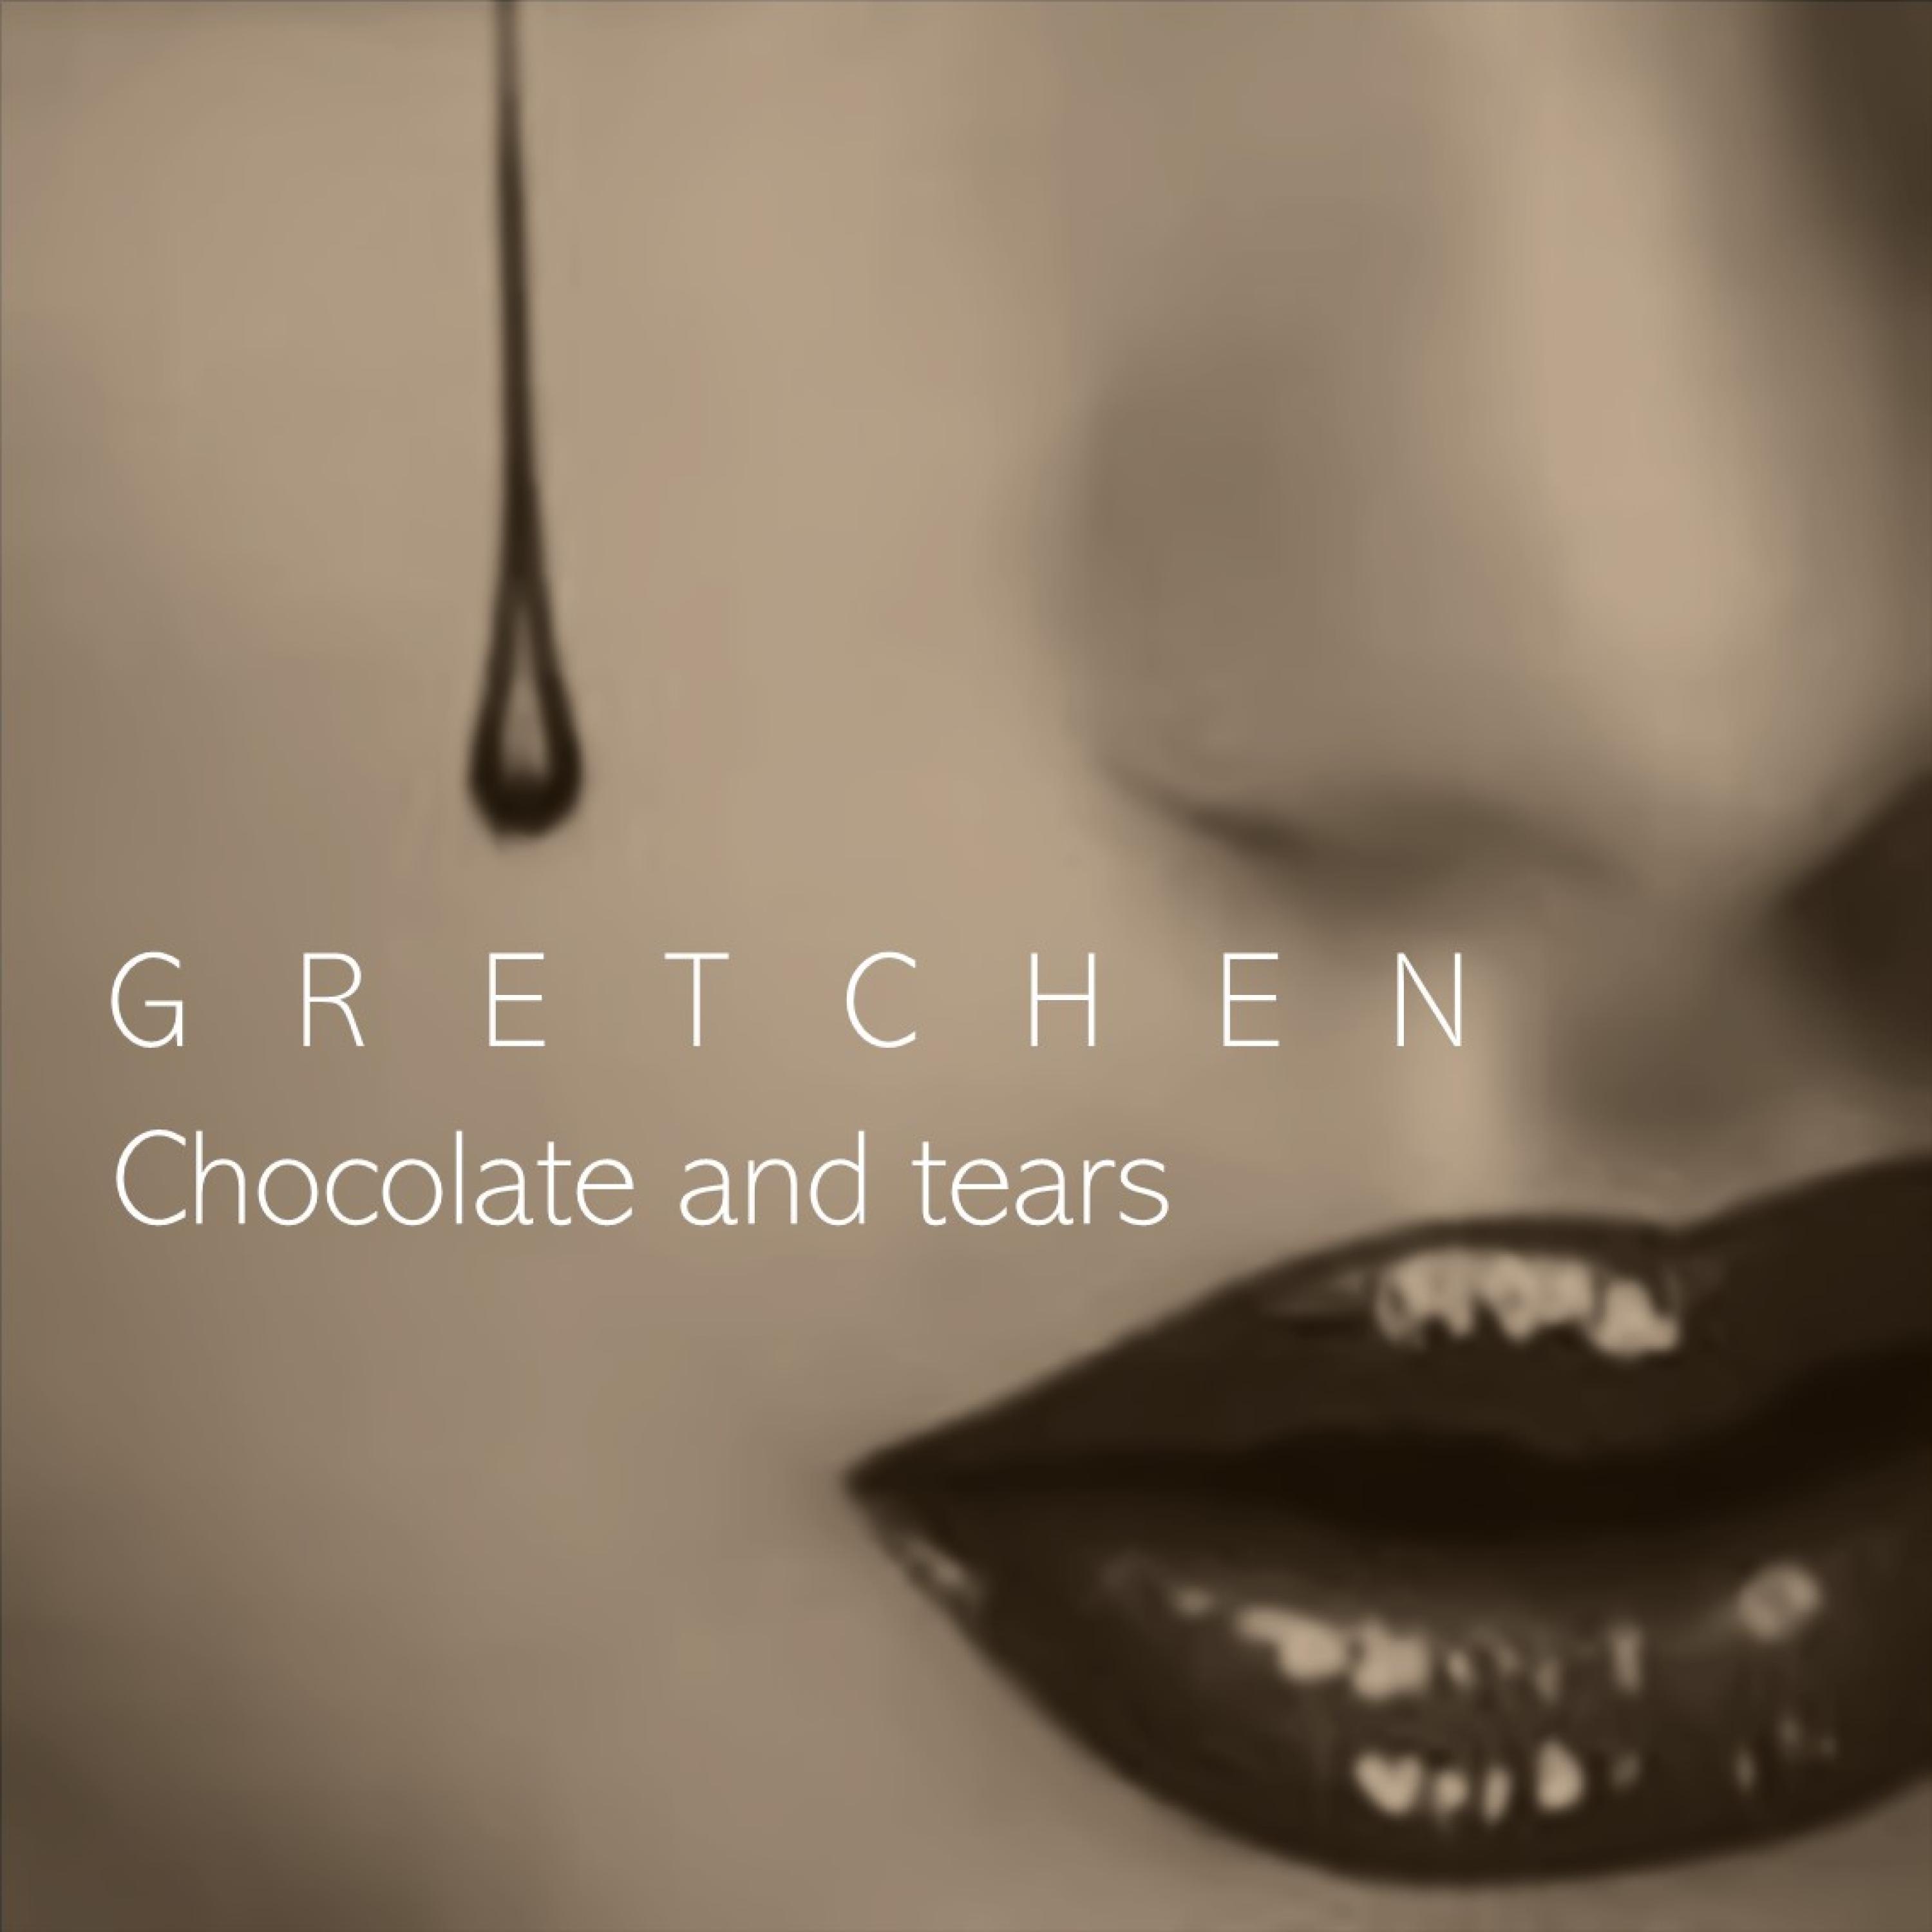 Gretchen - Chocolate and tears